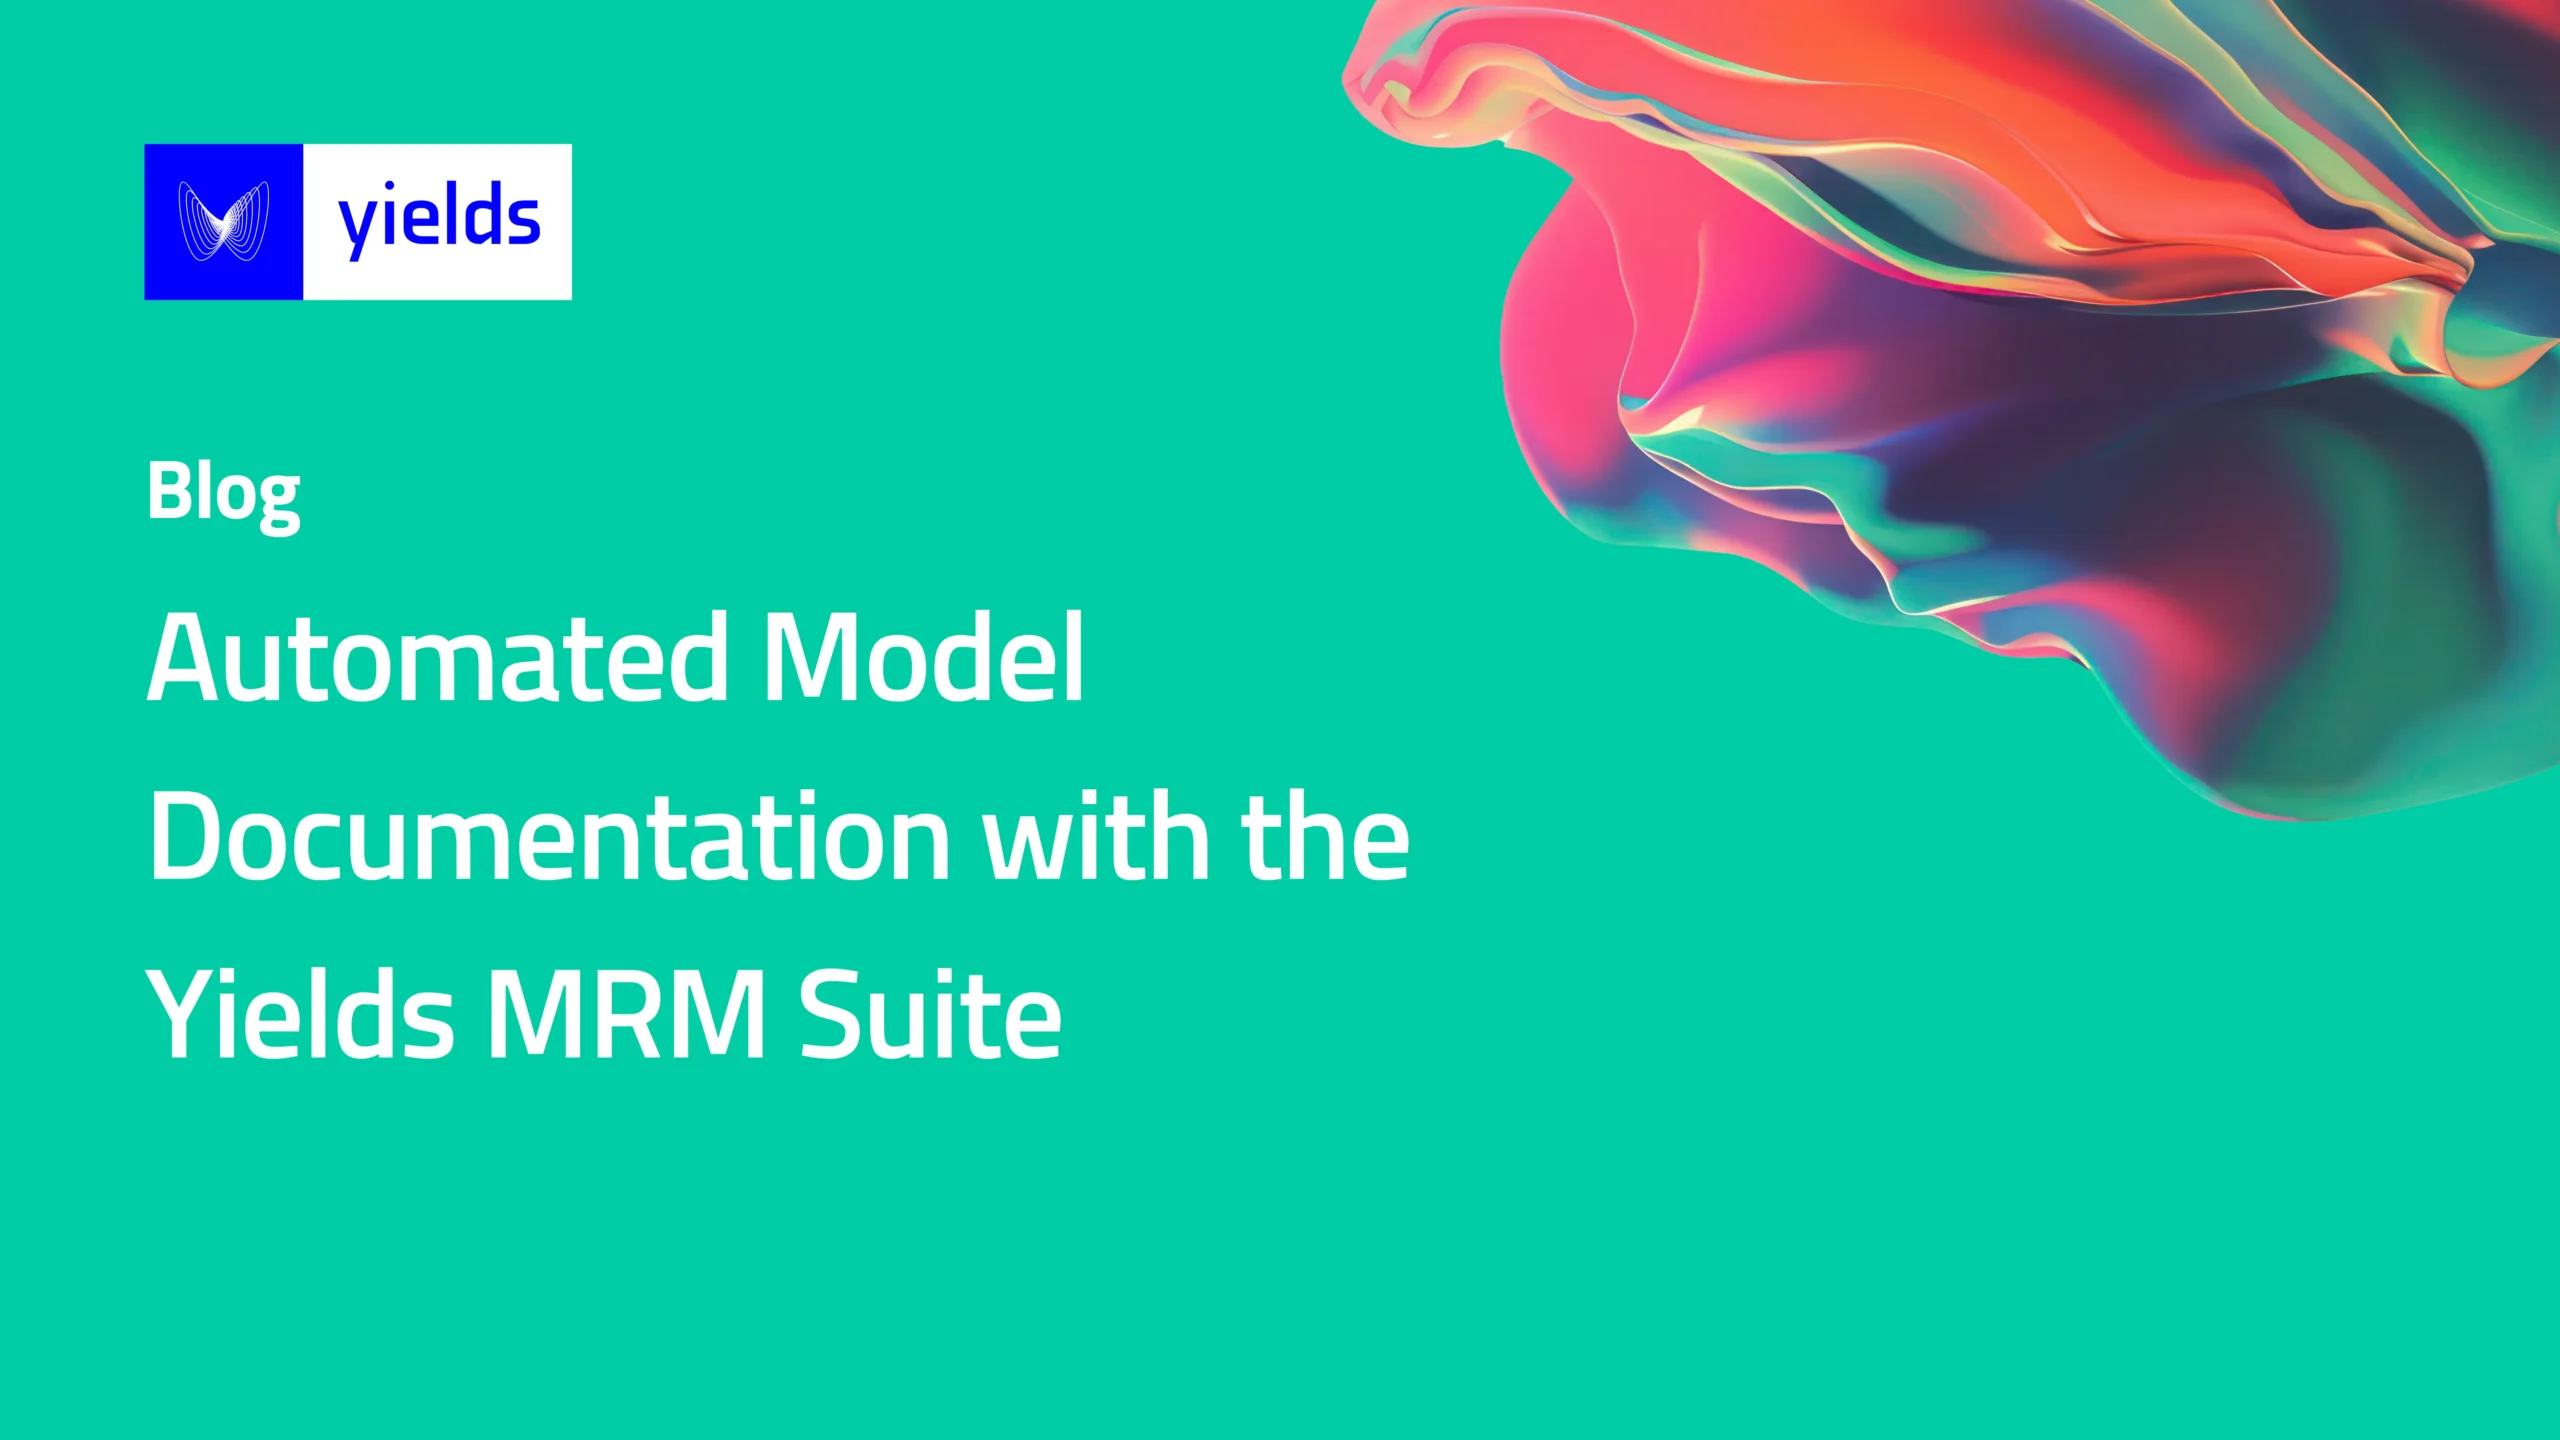 Automated Model Documentation with the Yields MRM Suite